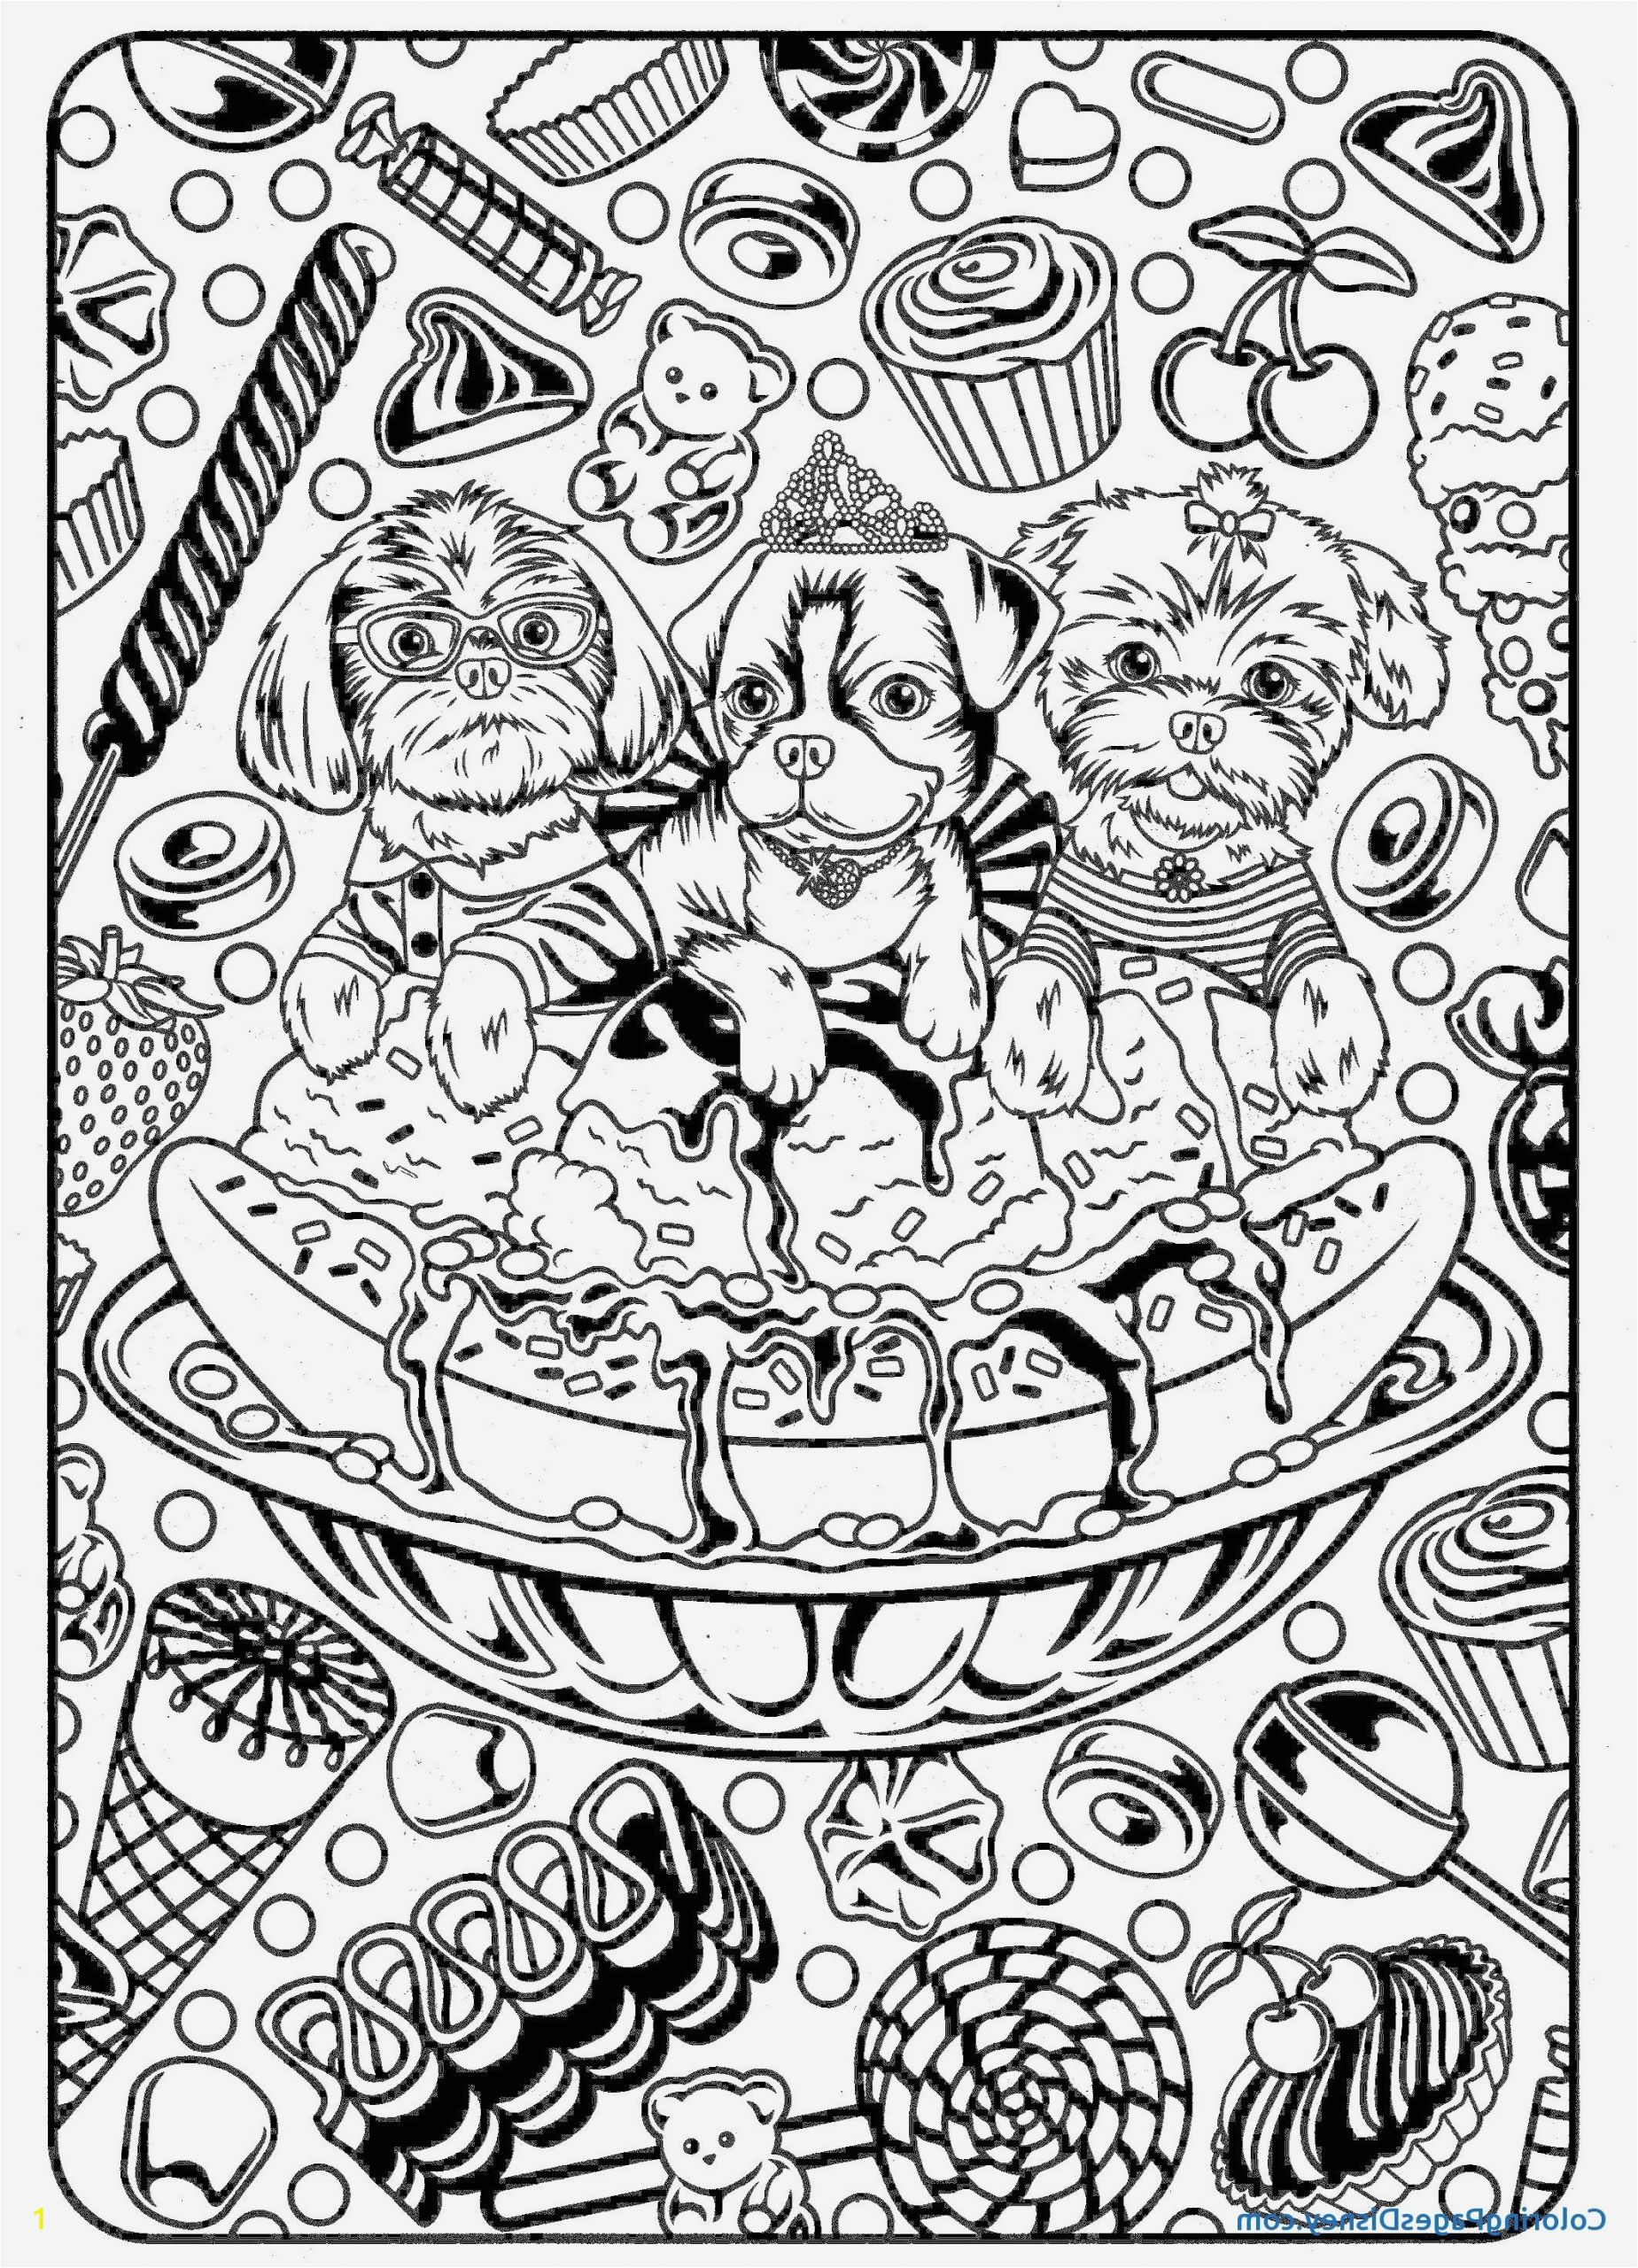 Descendants 2 Coloring Pages Printable 26 Awesome S Rangoli Coloring Page